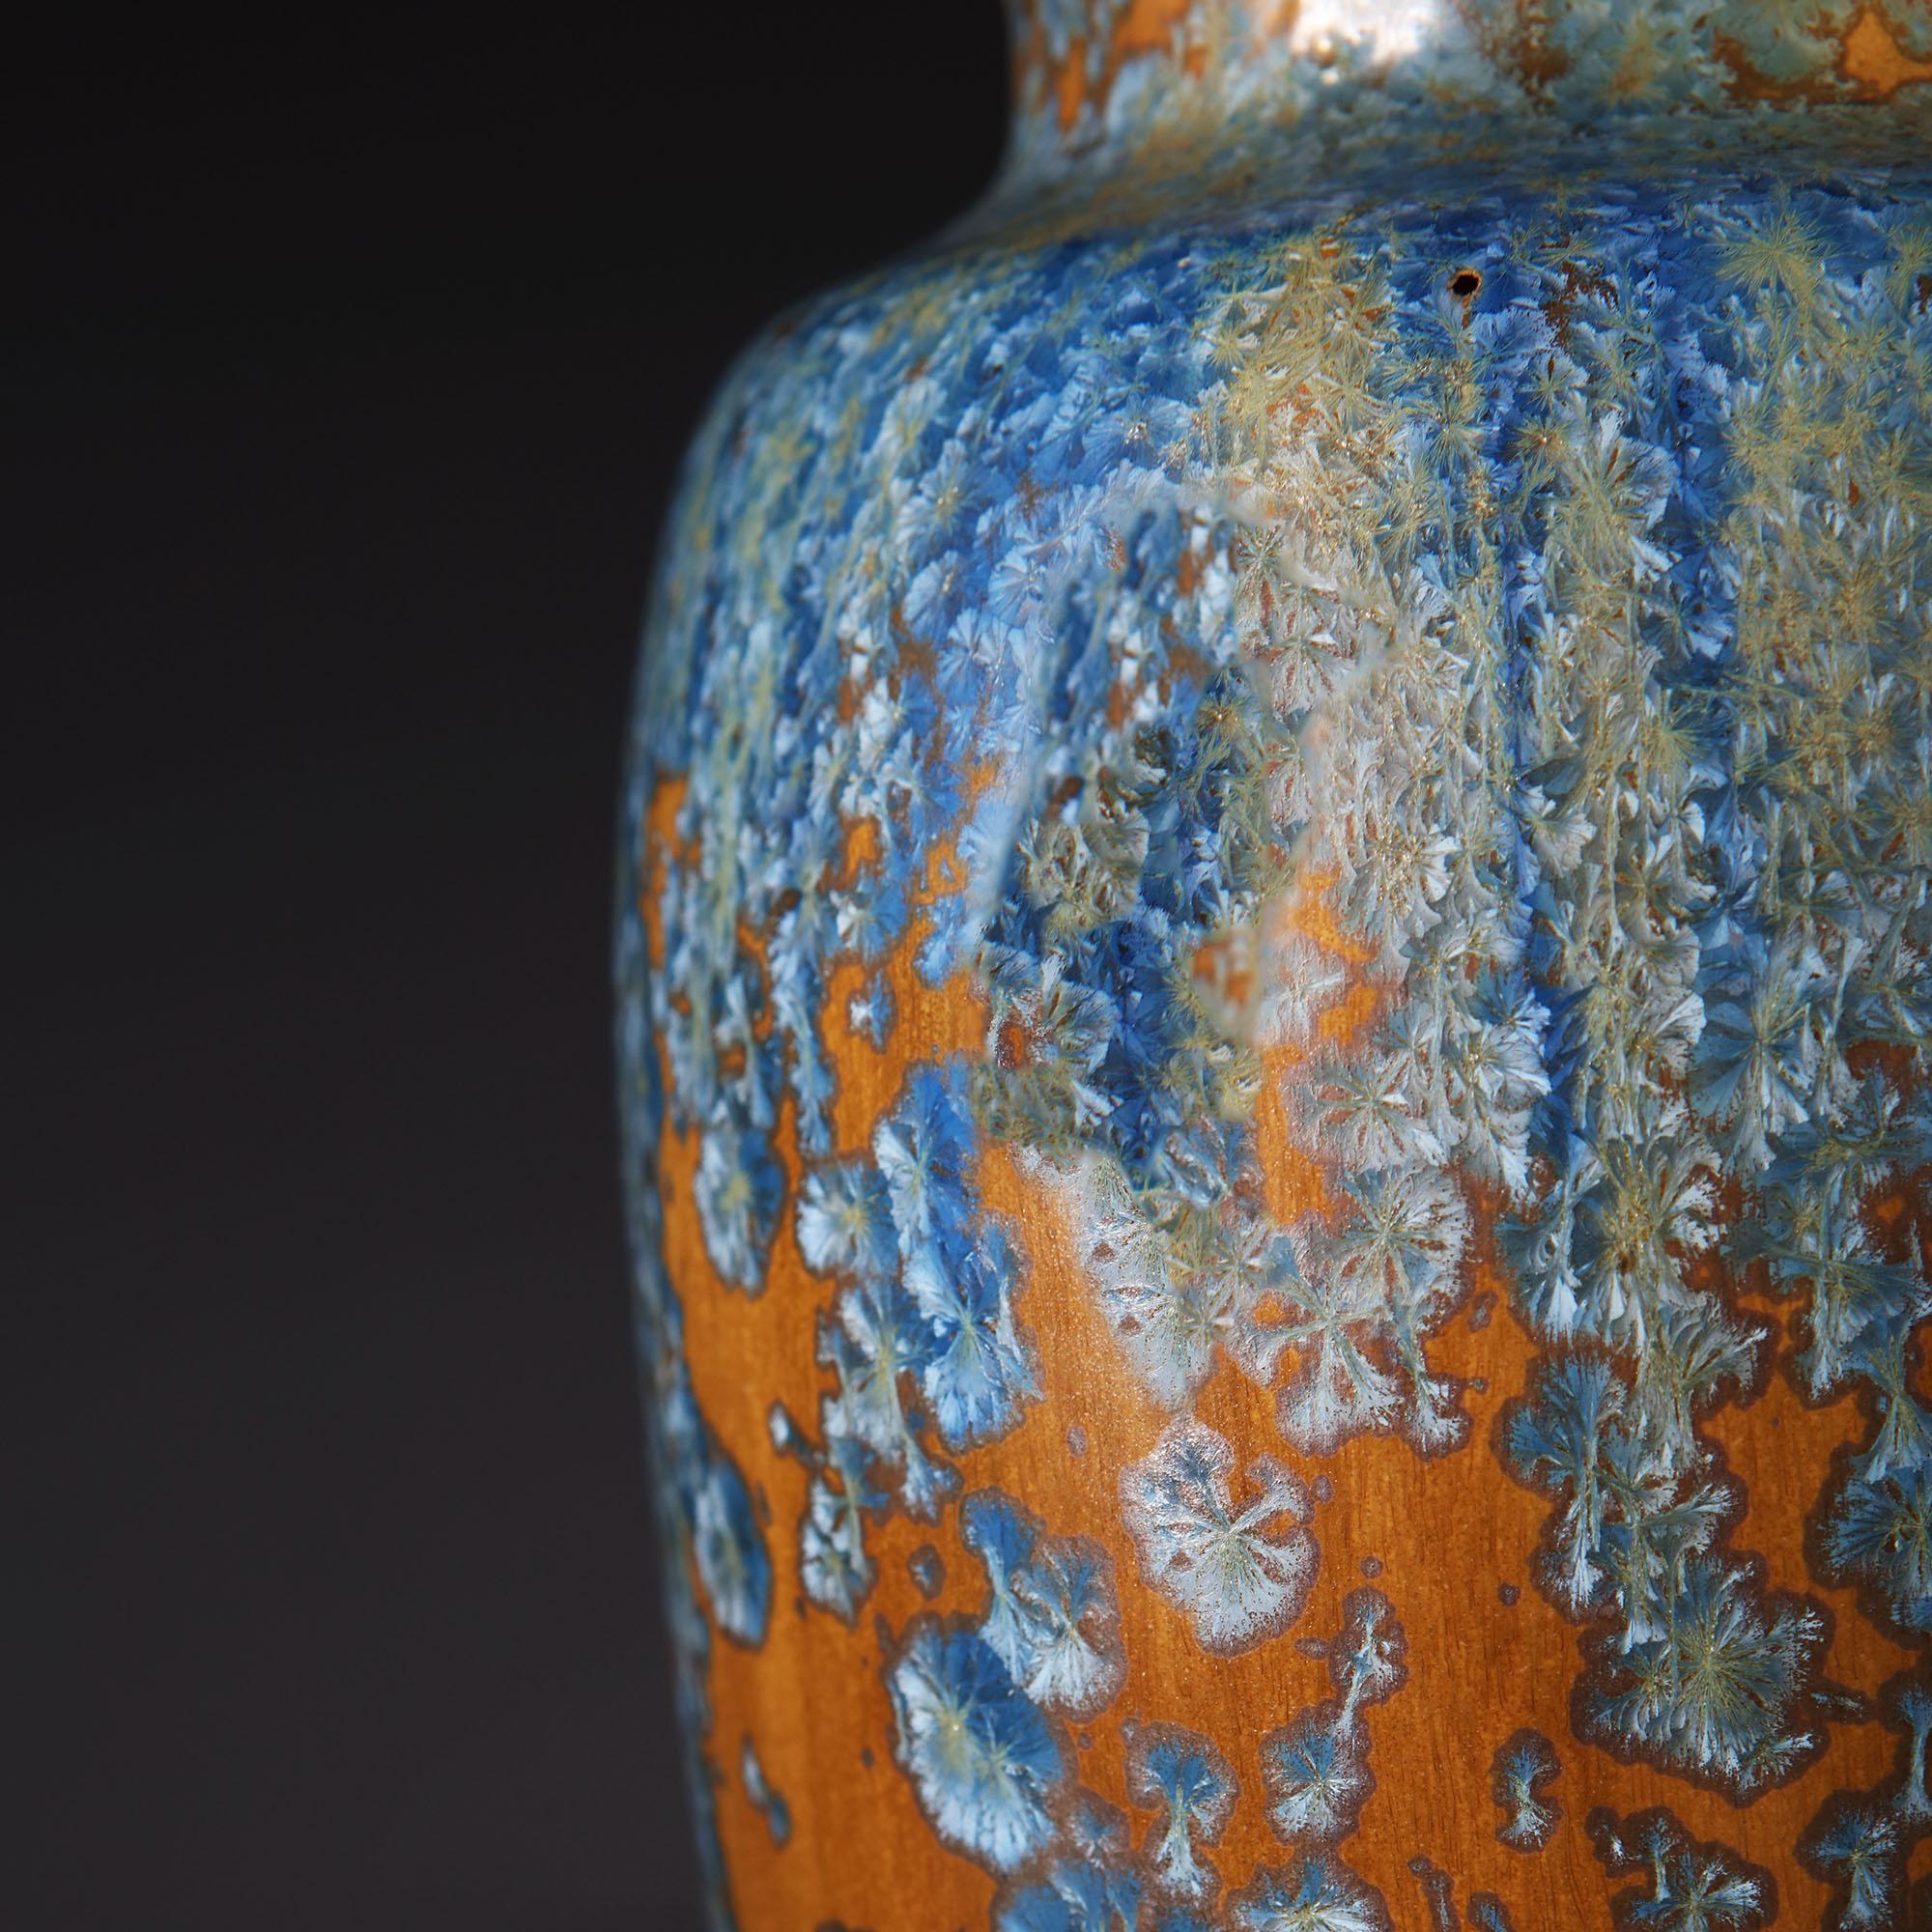 A fine early 20th century French art pottery vase with blue and amber crystalline glaze, now mounted as a lamp. Attributed to Pierrefonds.

The Societe Faienciere Heraldique de Pierrefonds pottery studio was founded in the village of Pierrefonds in